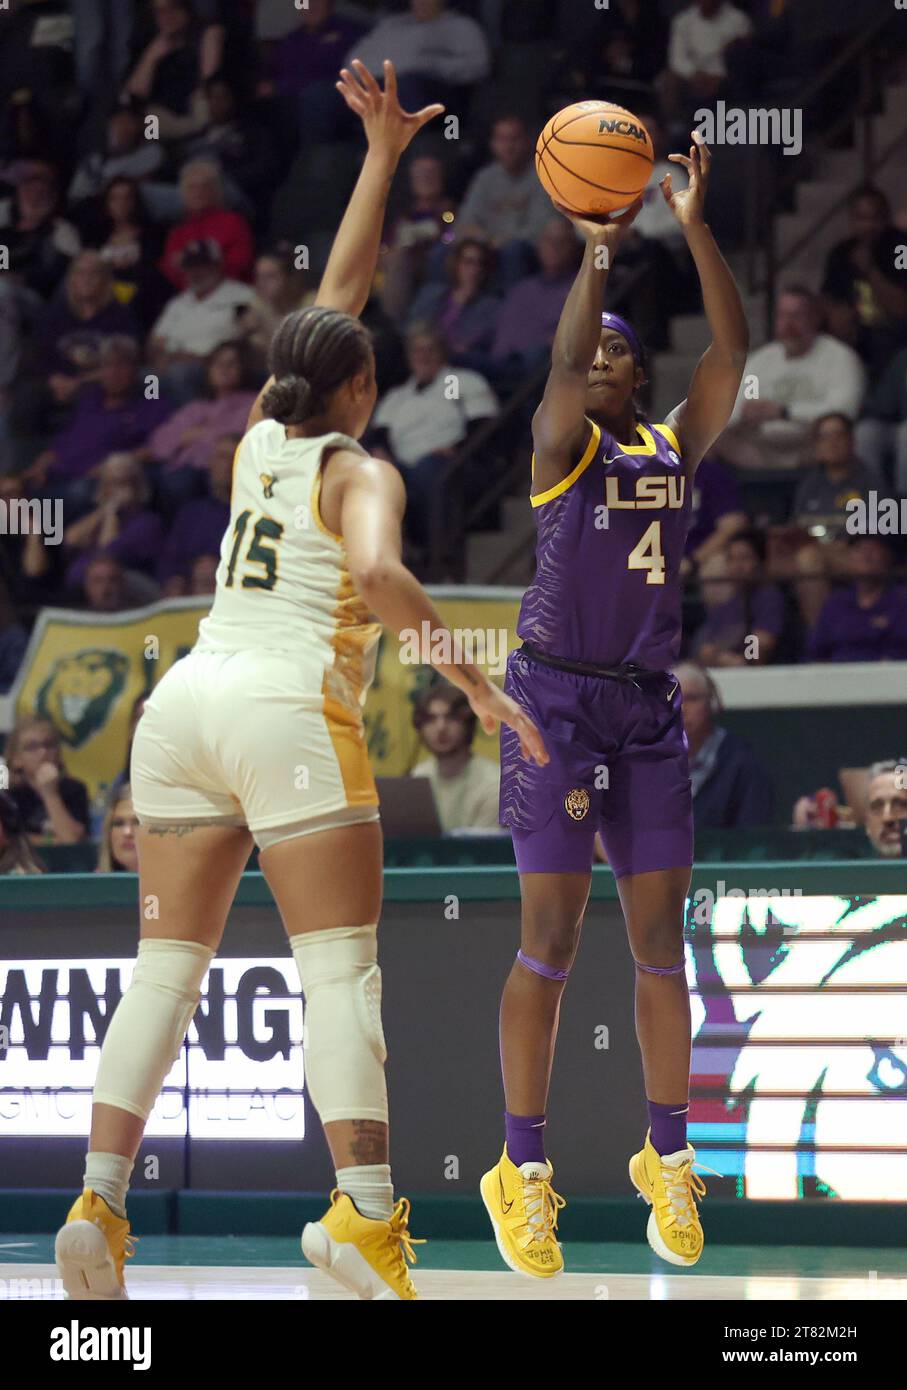 Hammond, USA. 17th Nov, 2023. LSU Lady Tigers guard Flau'jae Johnson (4) shoots a three-pointer against SE Louisiana Lady Lions guard Daija Harvey (15) during a women's college basketball game at the University Center in Hammond, Louisiana on Friday, November 17, 2023. (Photo by Peter G. Forest/Sipa USA) Credit: Sipa USA/Alamy Live News Stock Photo